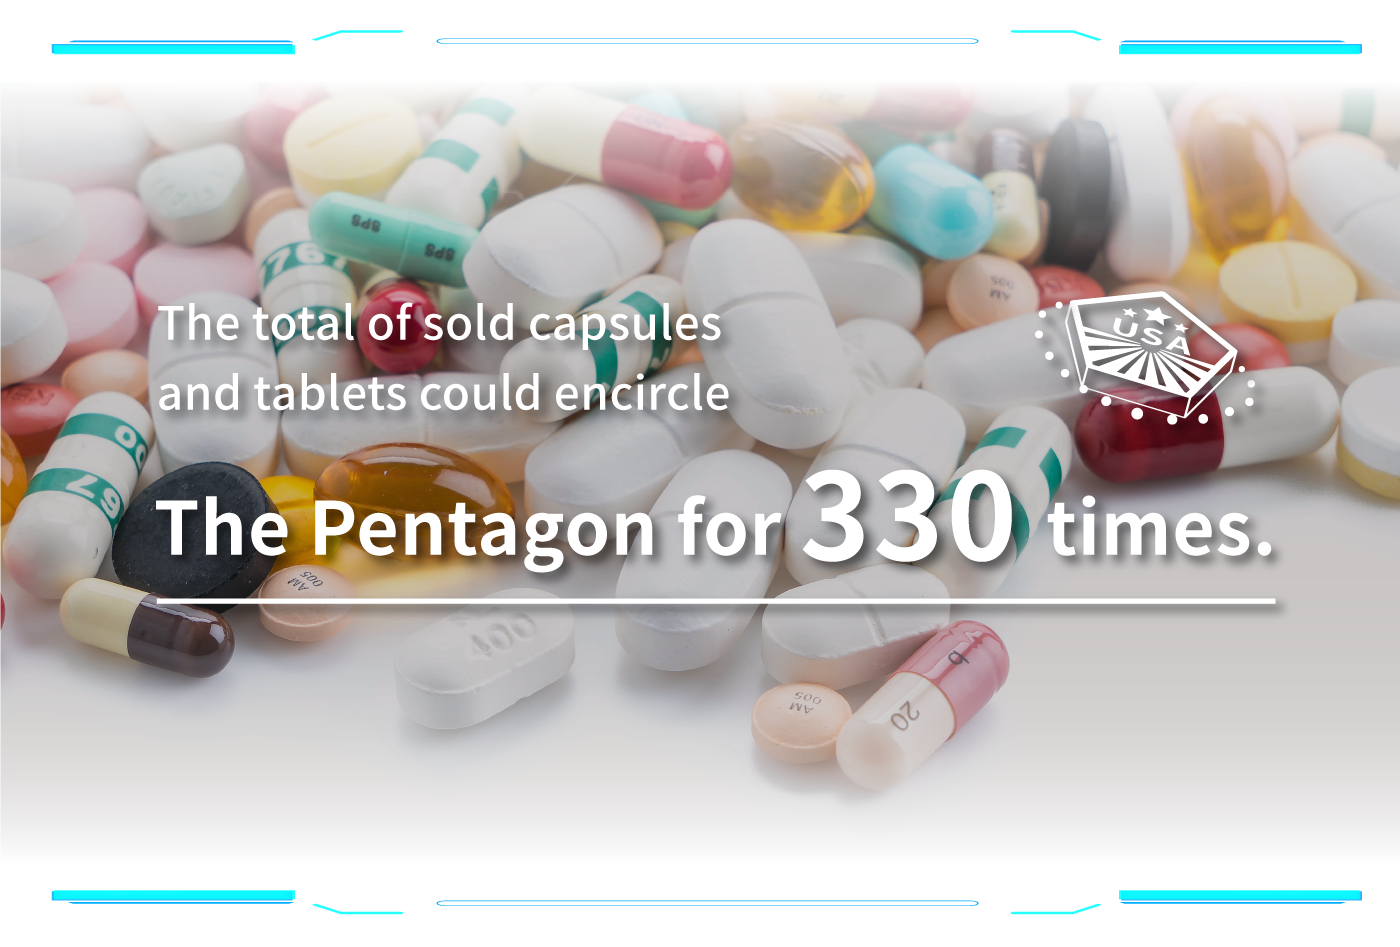 The total of sold capsules and tablets could encircle The Pentagon for 330 times.